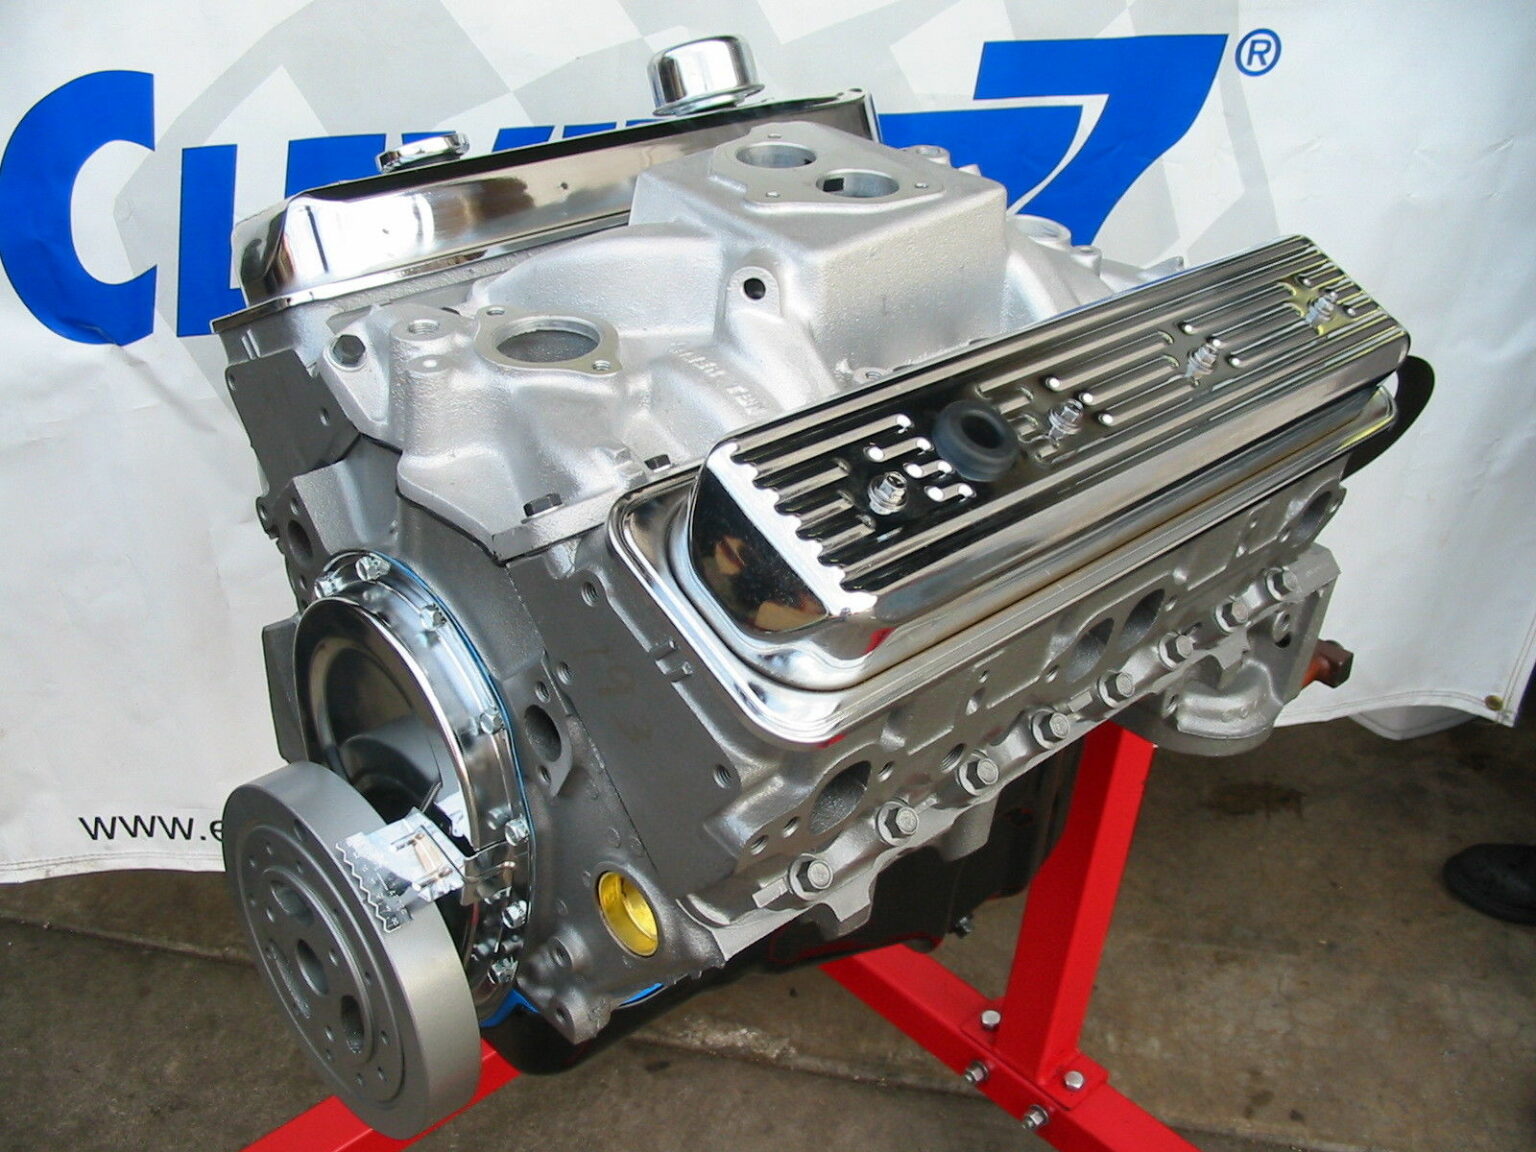 Gm 350 Engine For Sale